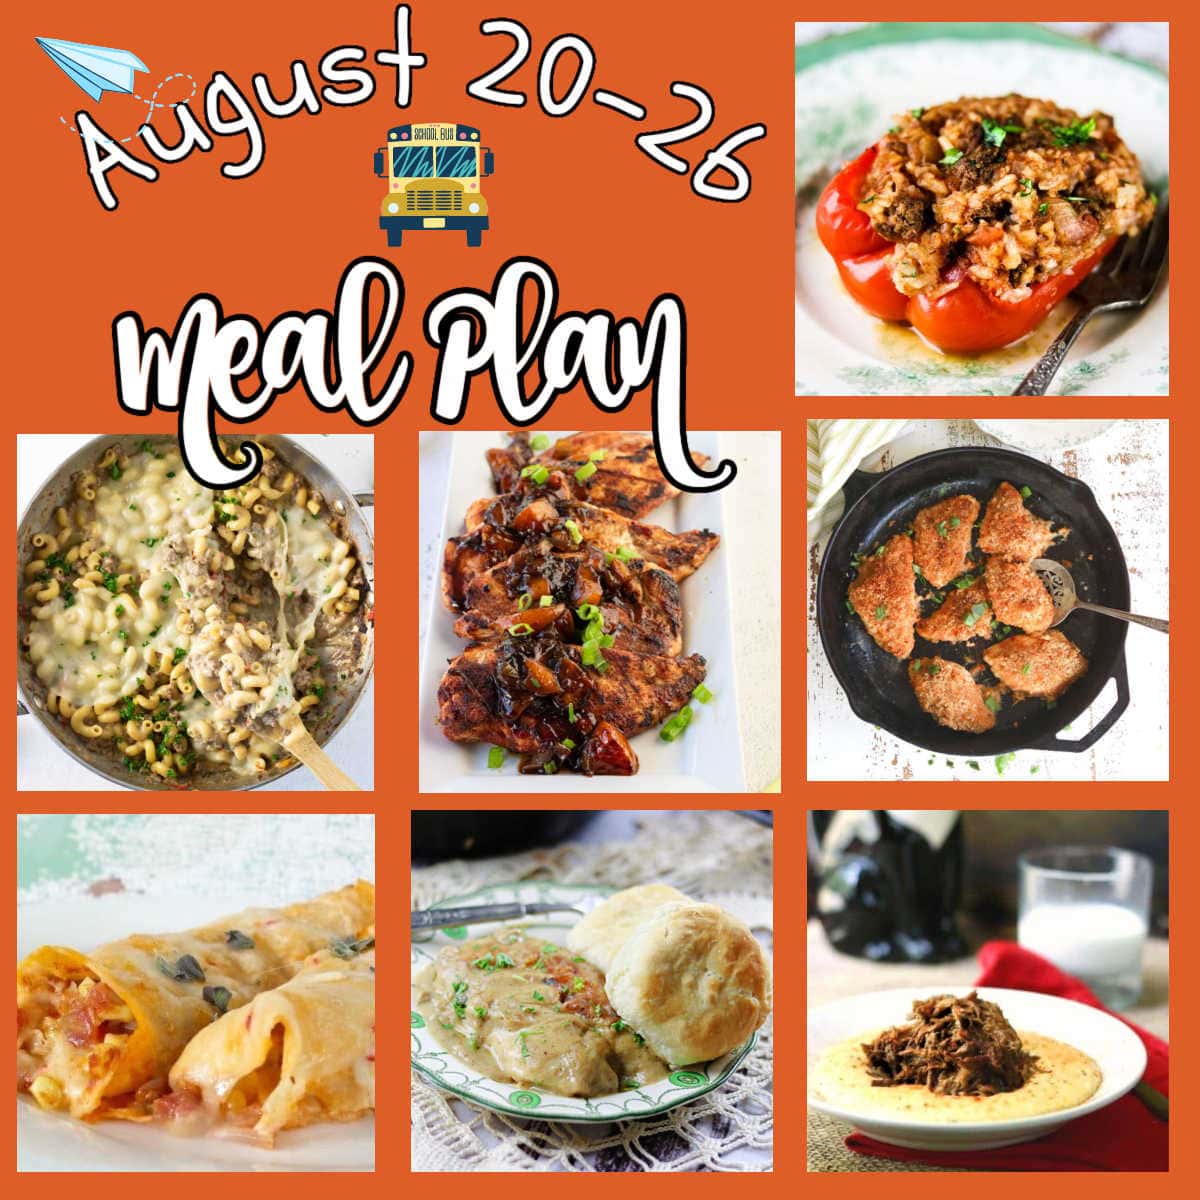 Collage of images for the August 20 meal plan.